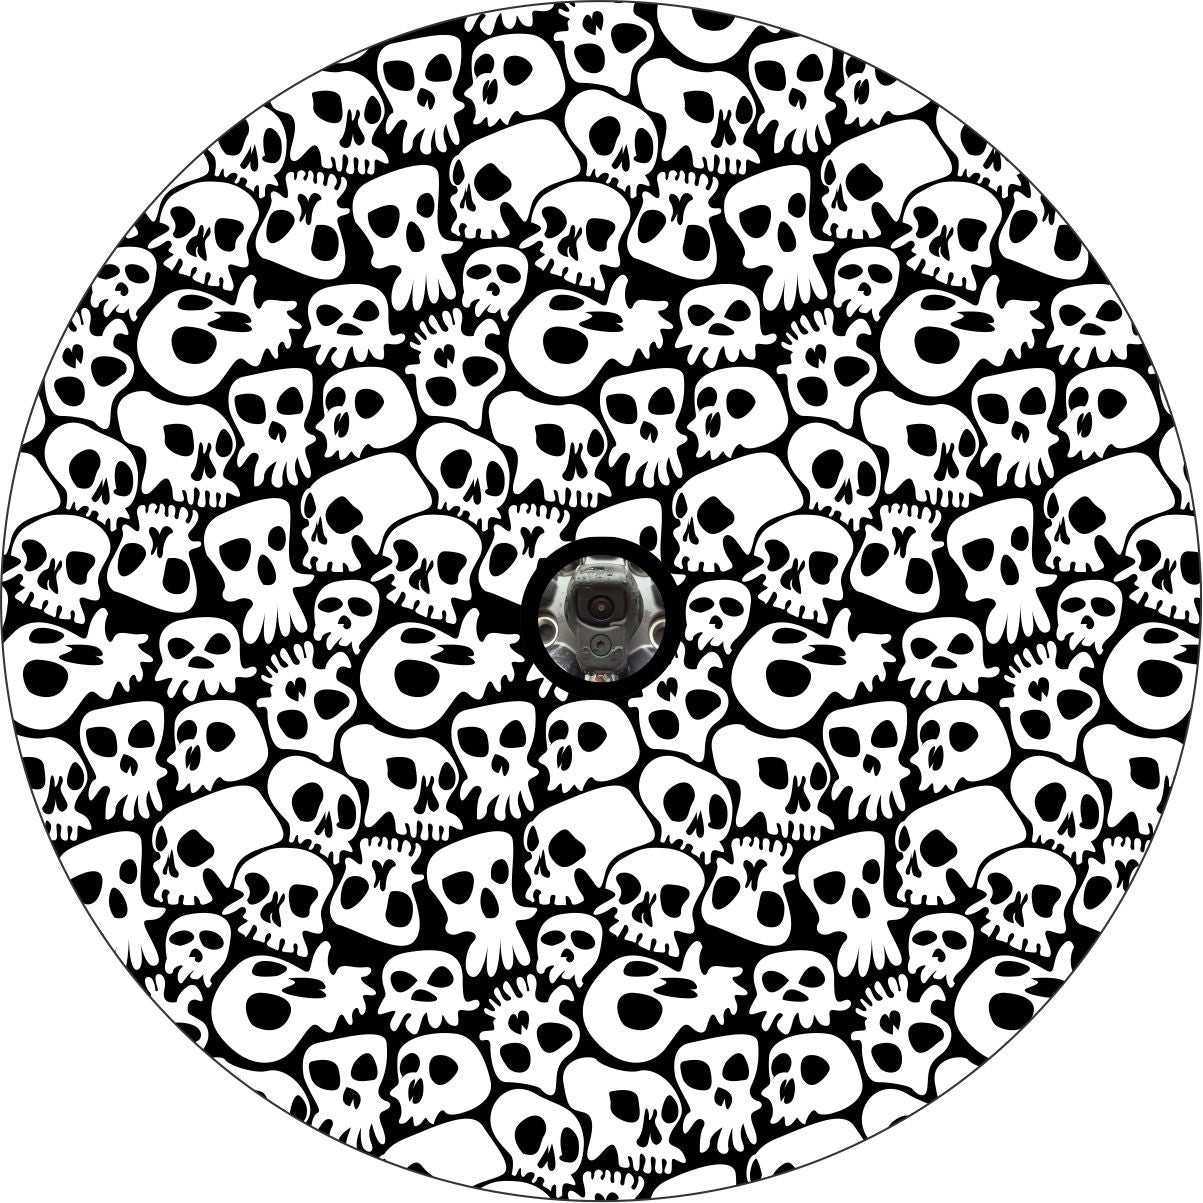 Fun and funky spooky skull spare tire cover pattern. Skulls covering the entire area of the black vinyl spare tire cover with JL back up camera design for wheels with back up cameras